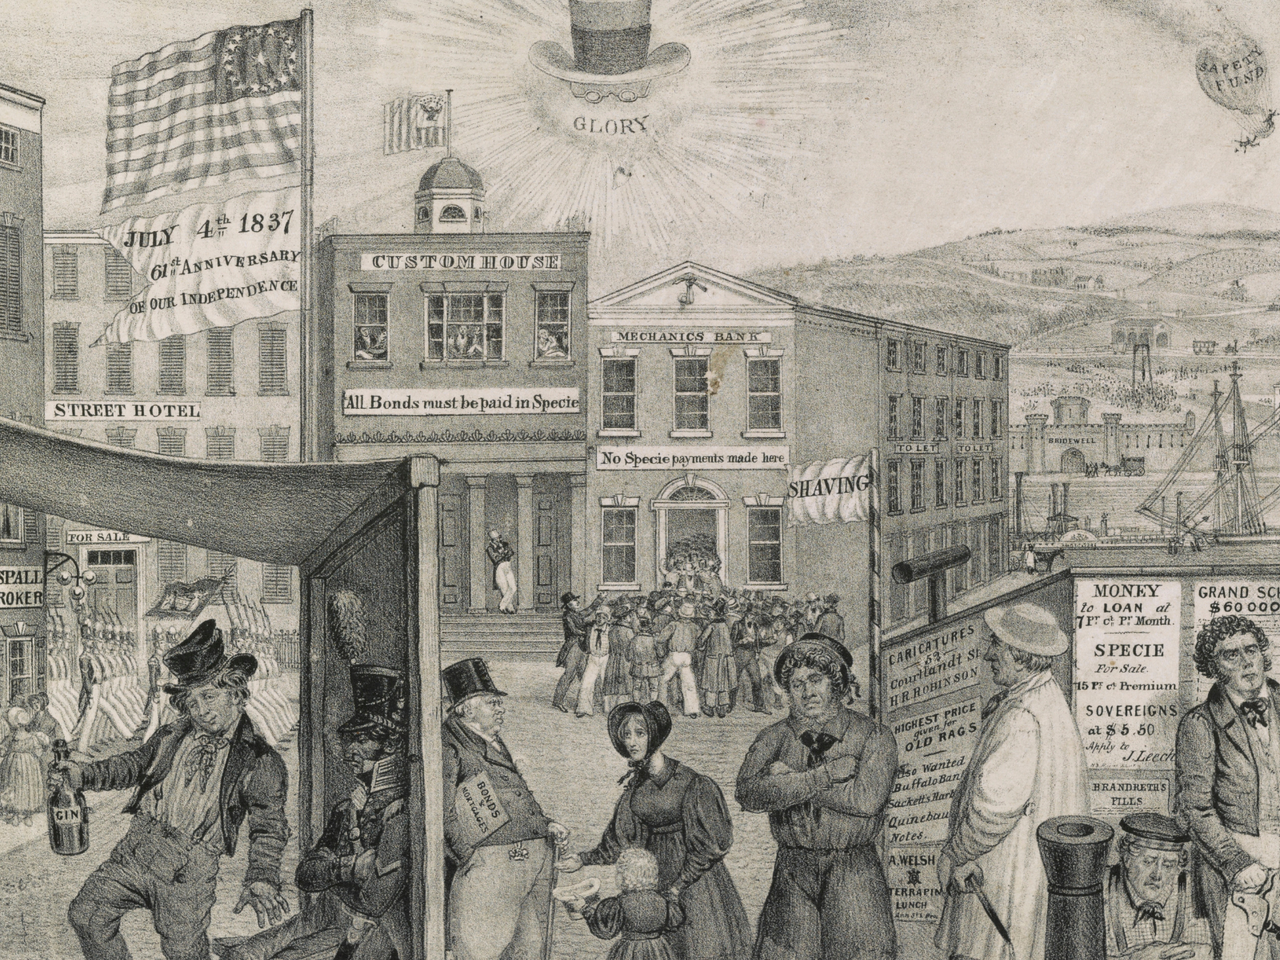 Lithograph showing a satyrical urban scene, intended to blame the depressed state of the American economy on Andrew Jackson, represented in the sky by floating hat, spectacles, and clay pipe with the word glory